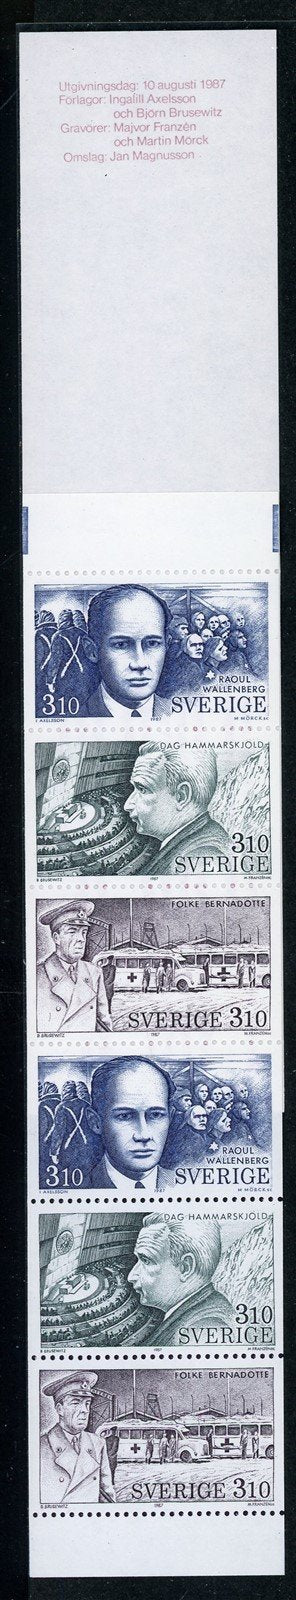 Sweden Scott #1645a MNH BOOKLET Swedes in the Service of Mankind CV$7+ 417408